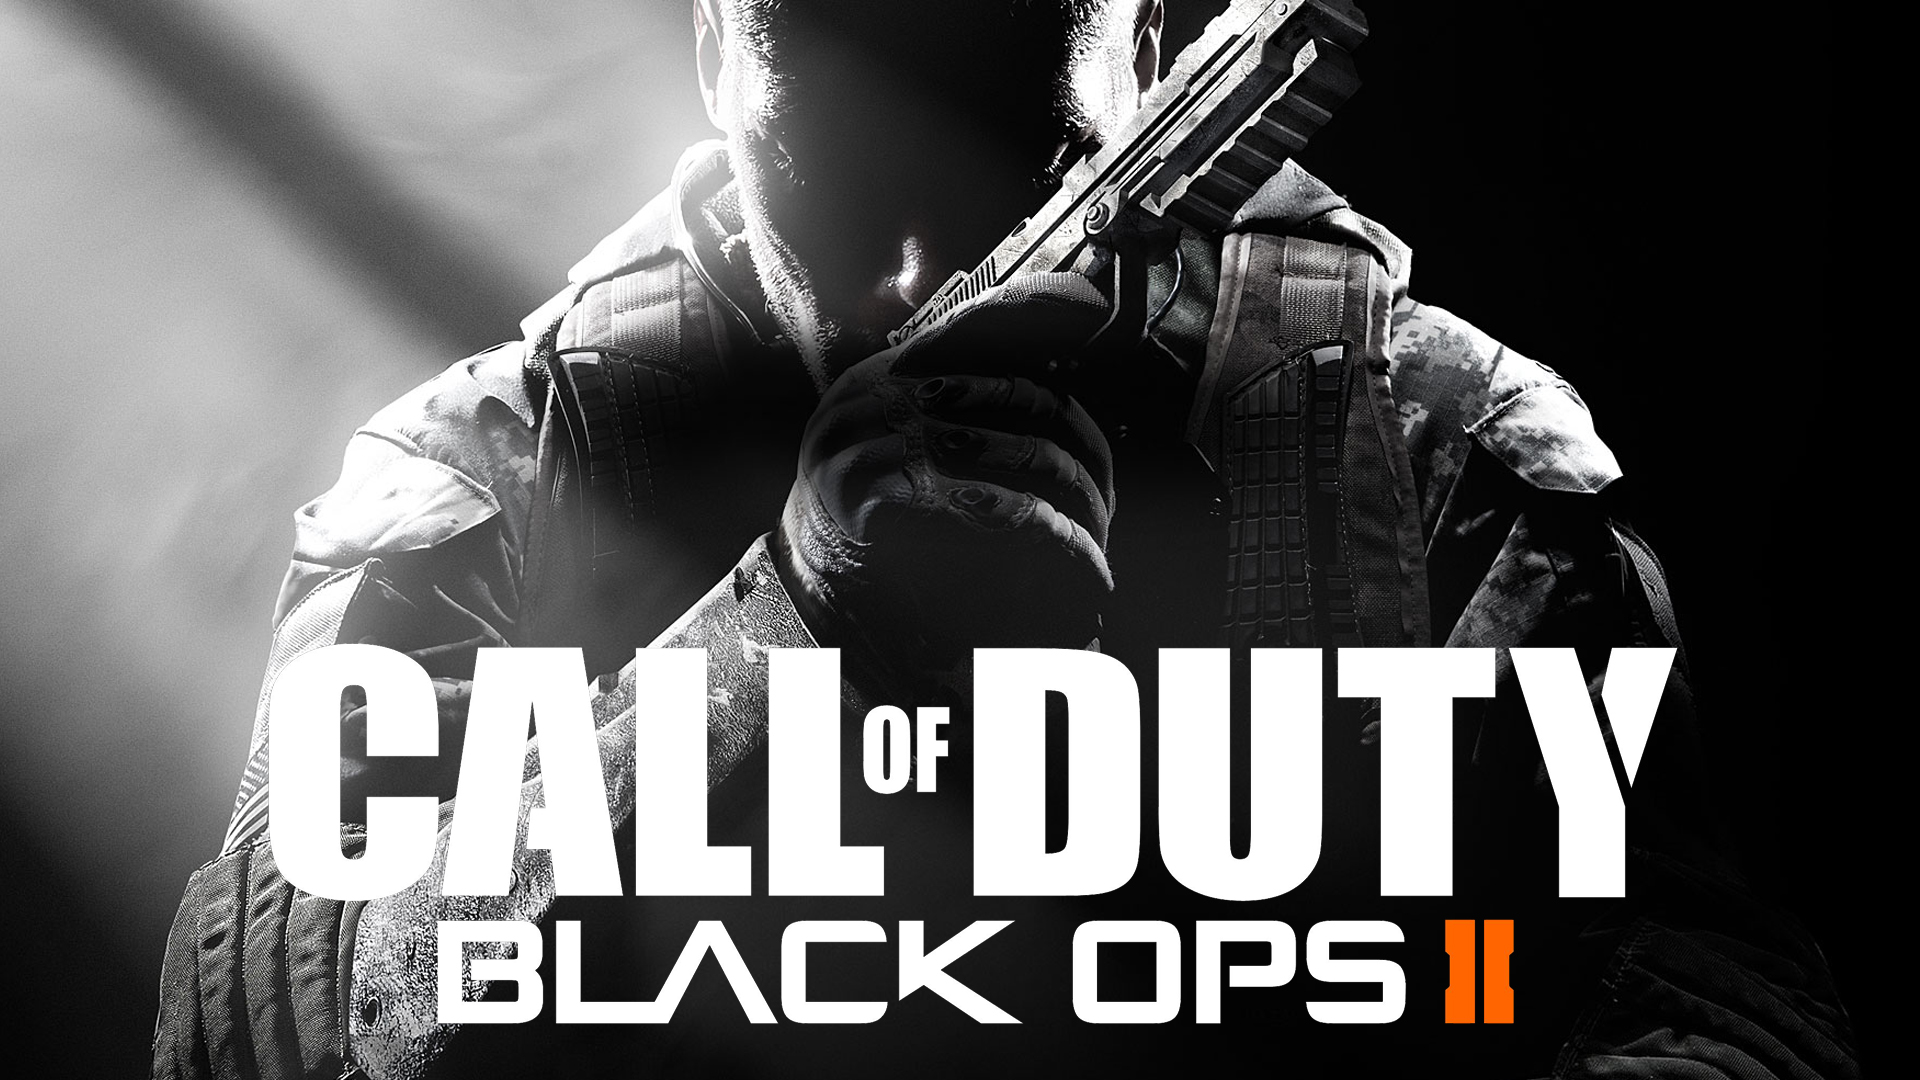 Video Game Call of Duty: Black Ops II HD Wallpaper | Background Image